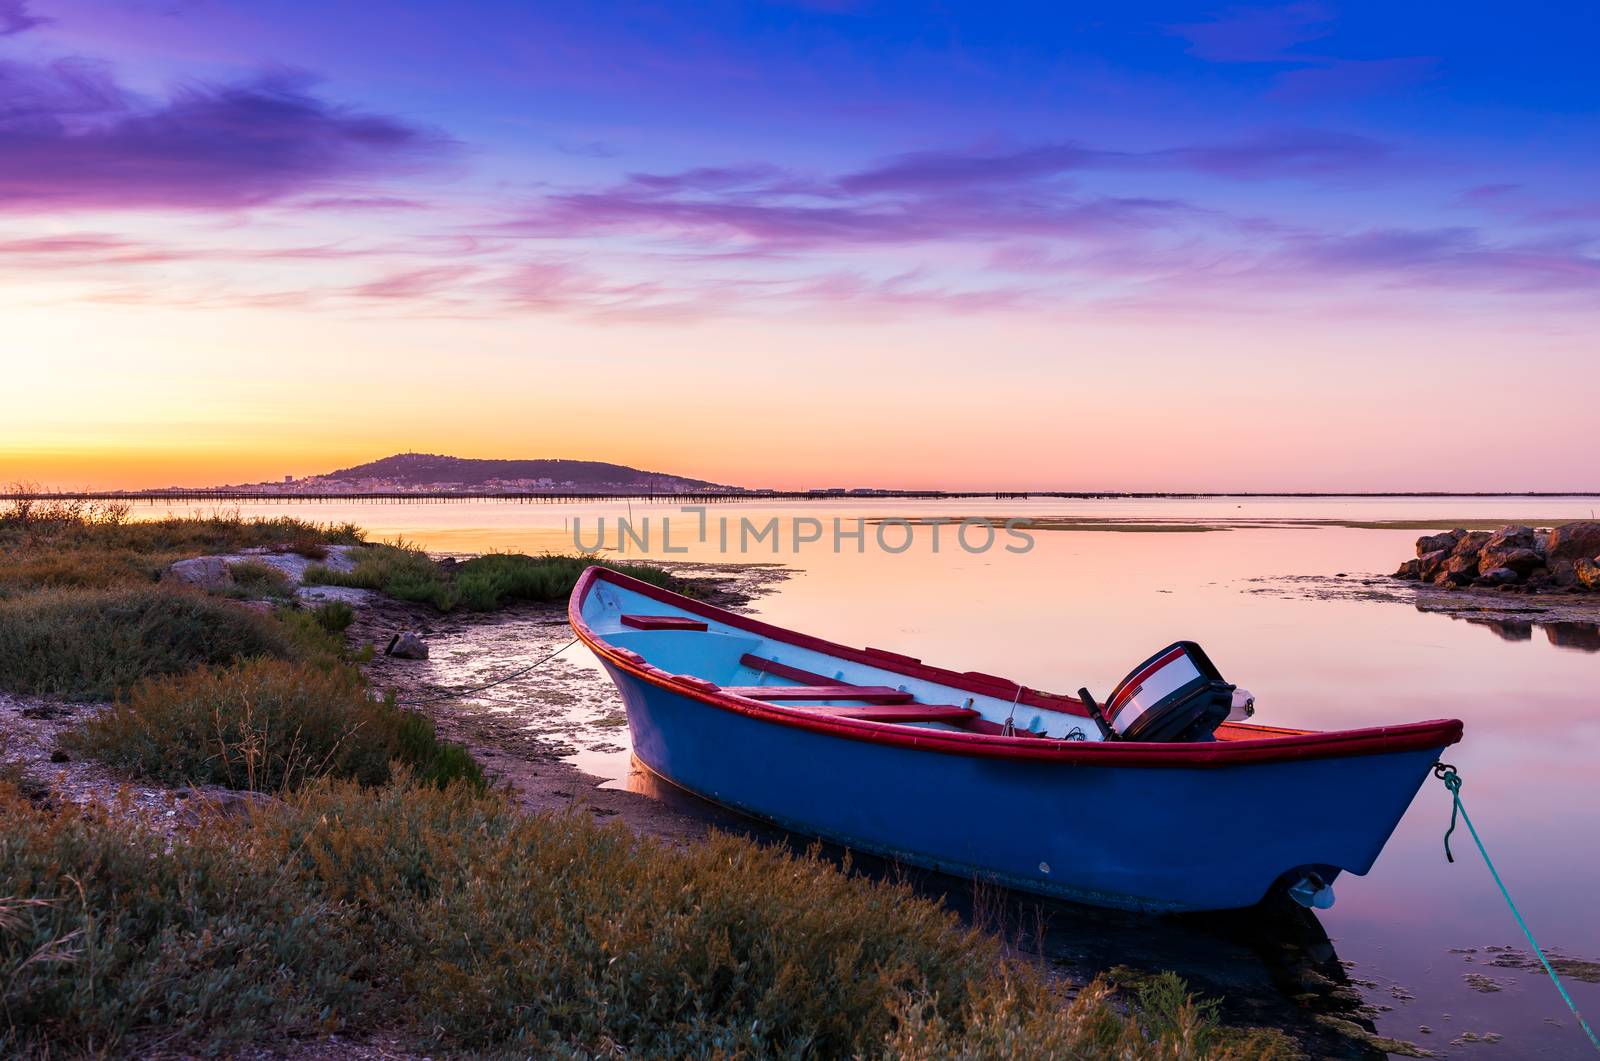 Rowboat on the Etang de Thau à Meze at dusk, in Hérault in Occitanie, France. by Frederic